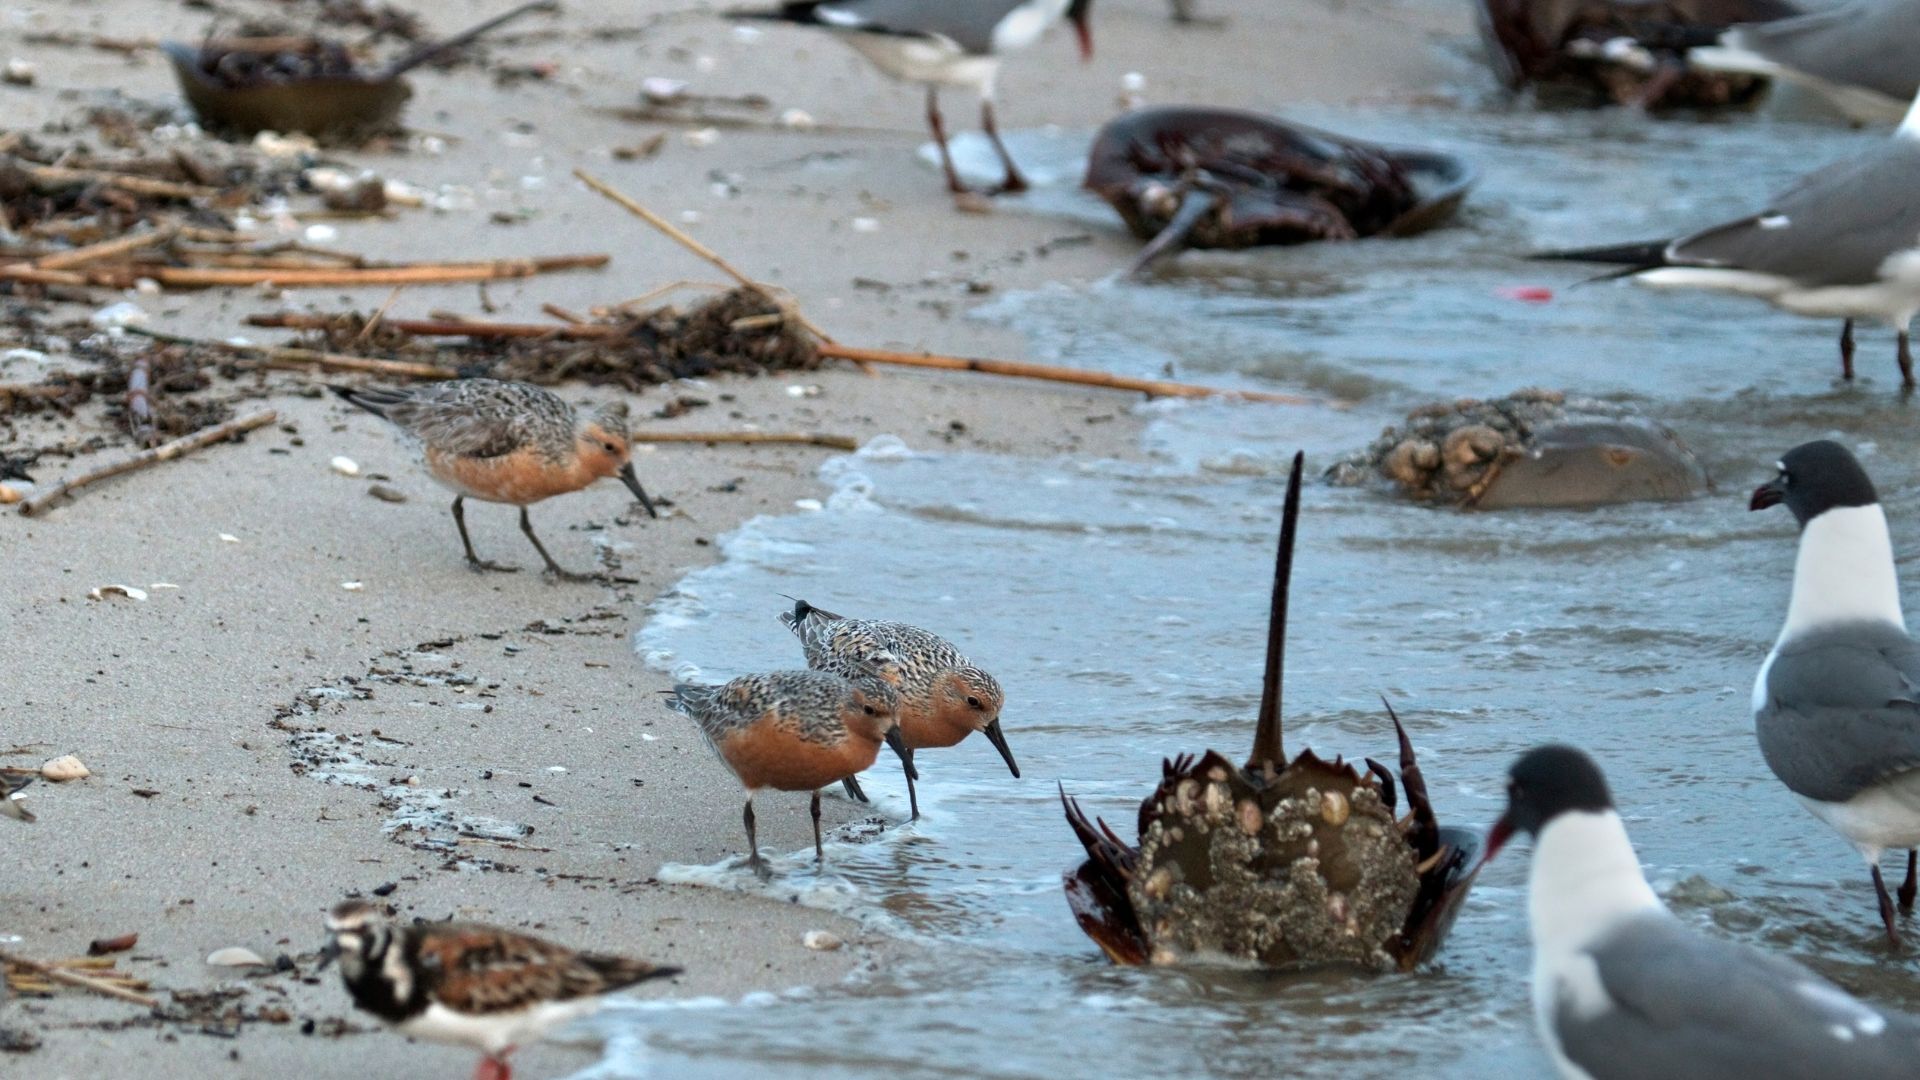 Red Knots and Laughing Gulls with Horseshoe Crabs at New Jersey Beach. Photo: milehightraveler / Getty Signature Images